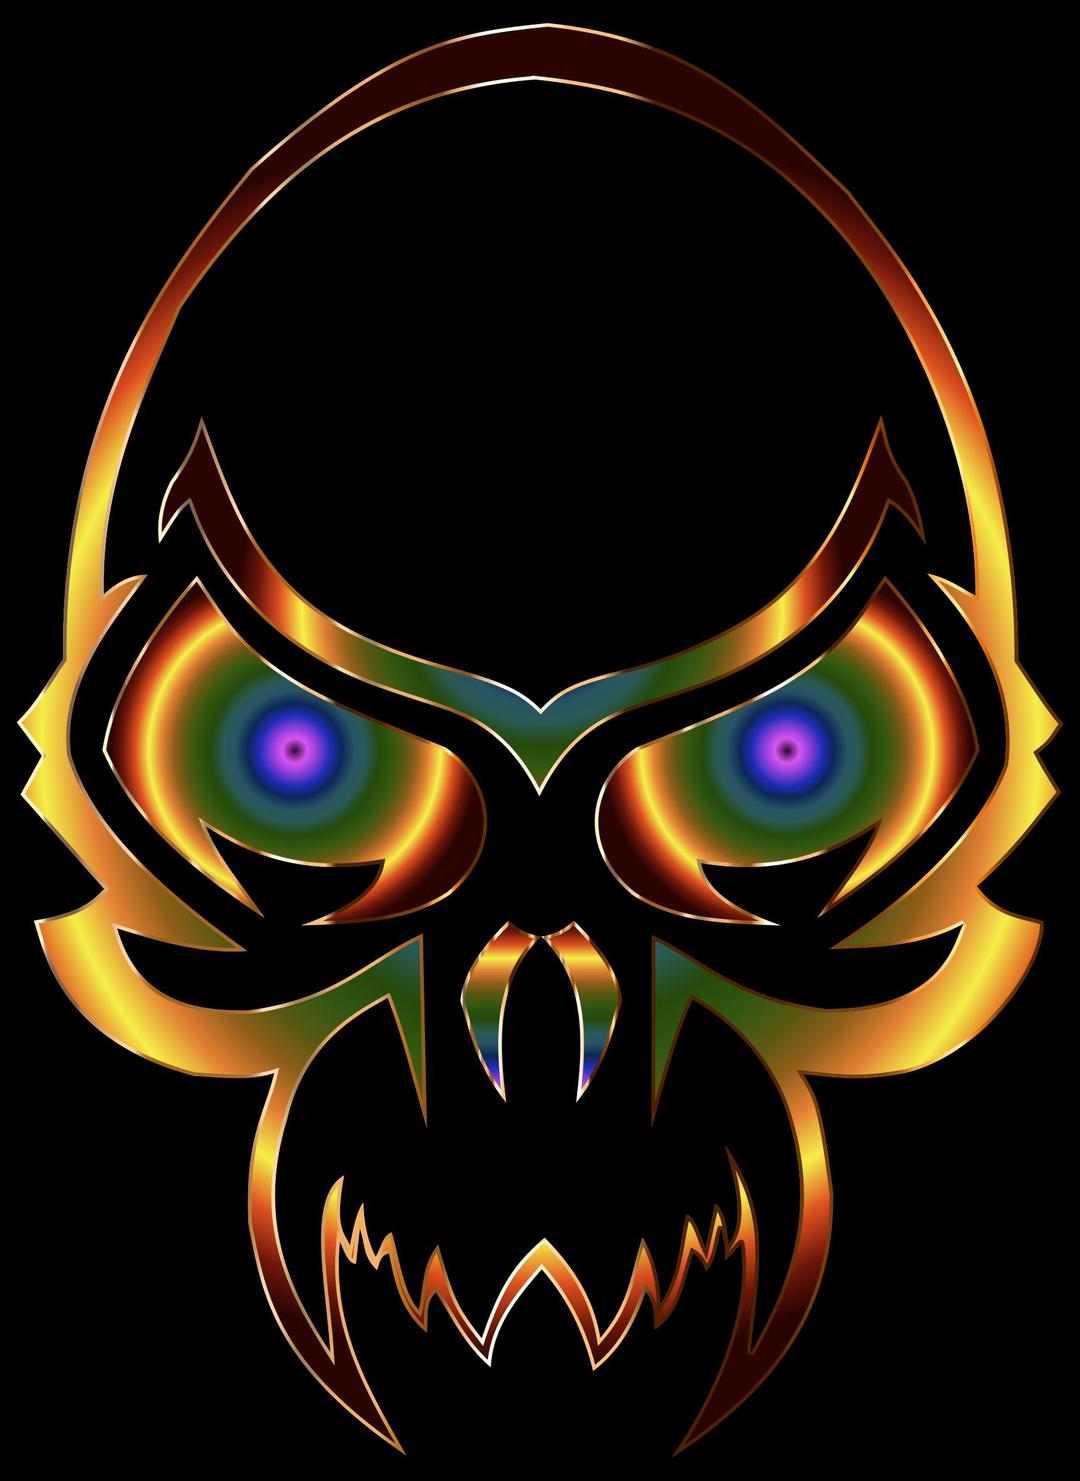 Colorful Skull 2 With Black png transparent